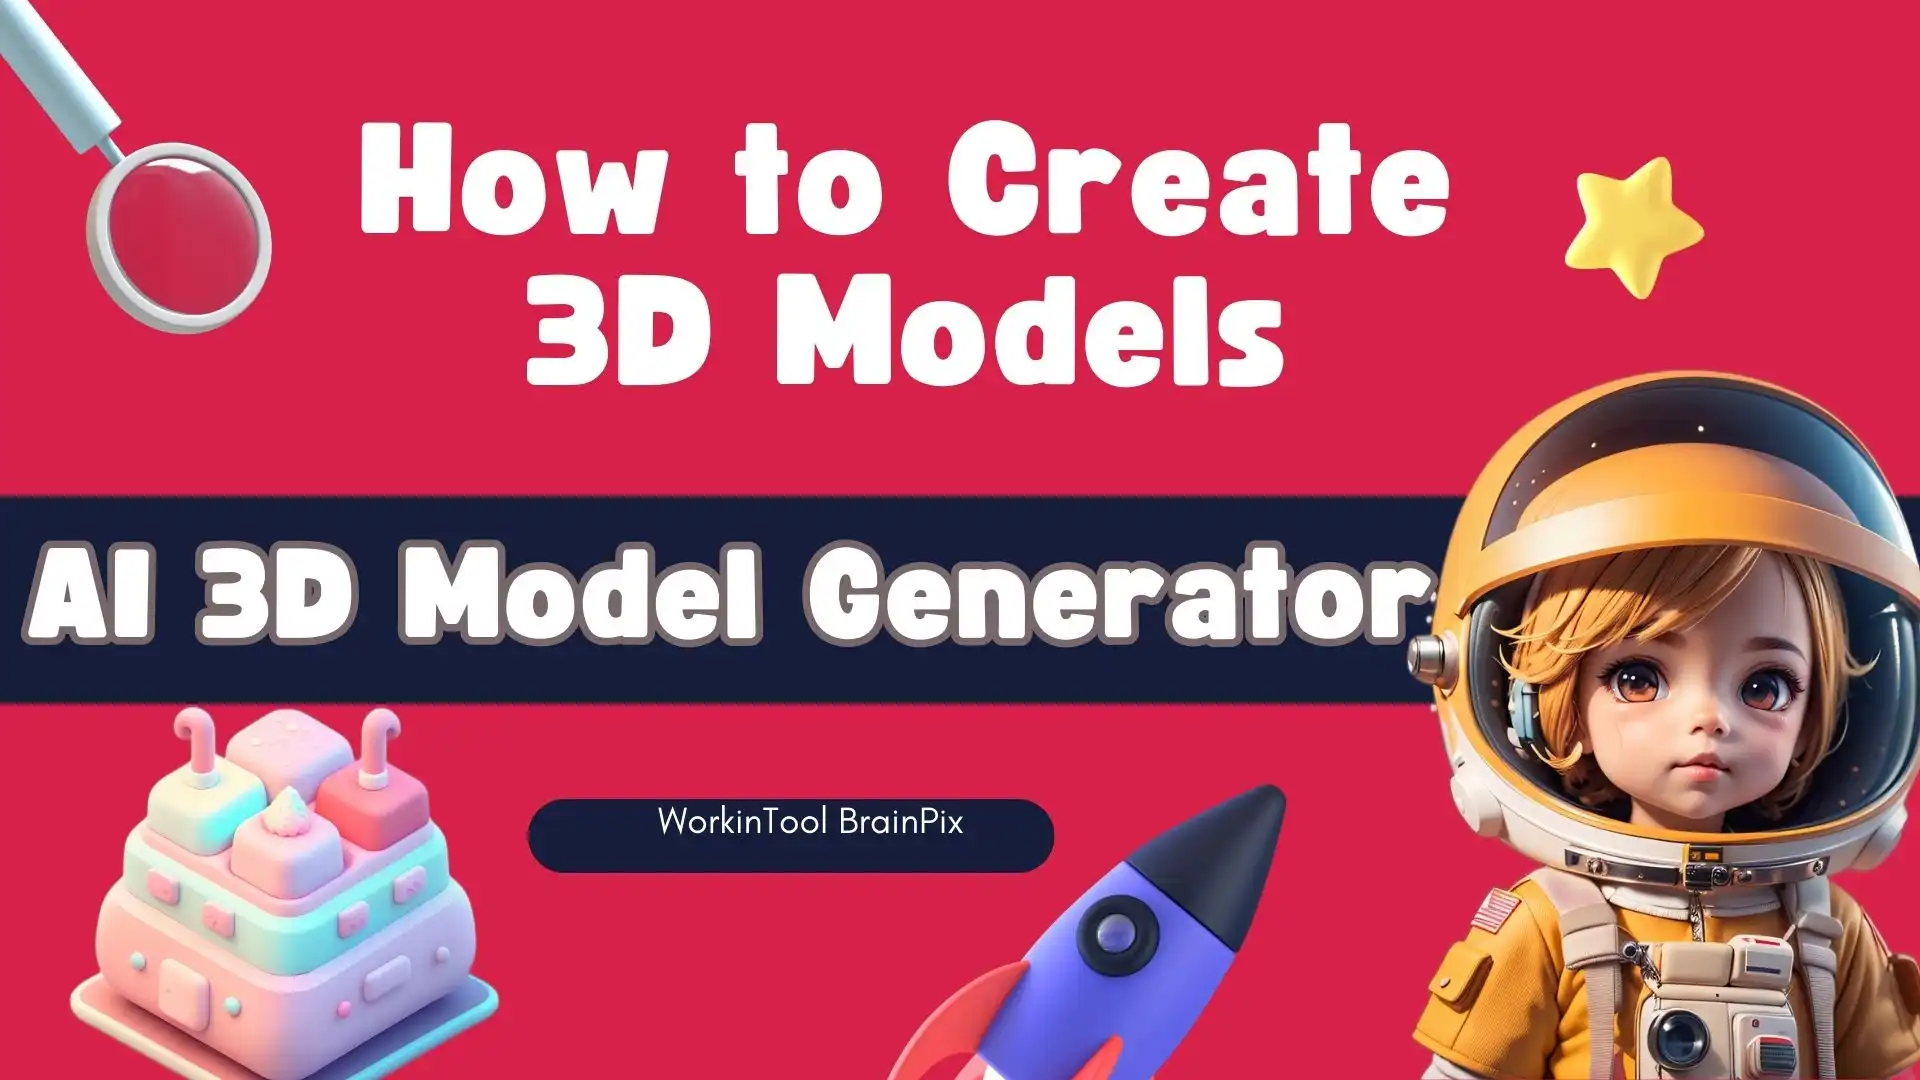 How to Create 3D Models with AI 3D Model Generator - WorkinTool